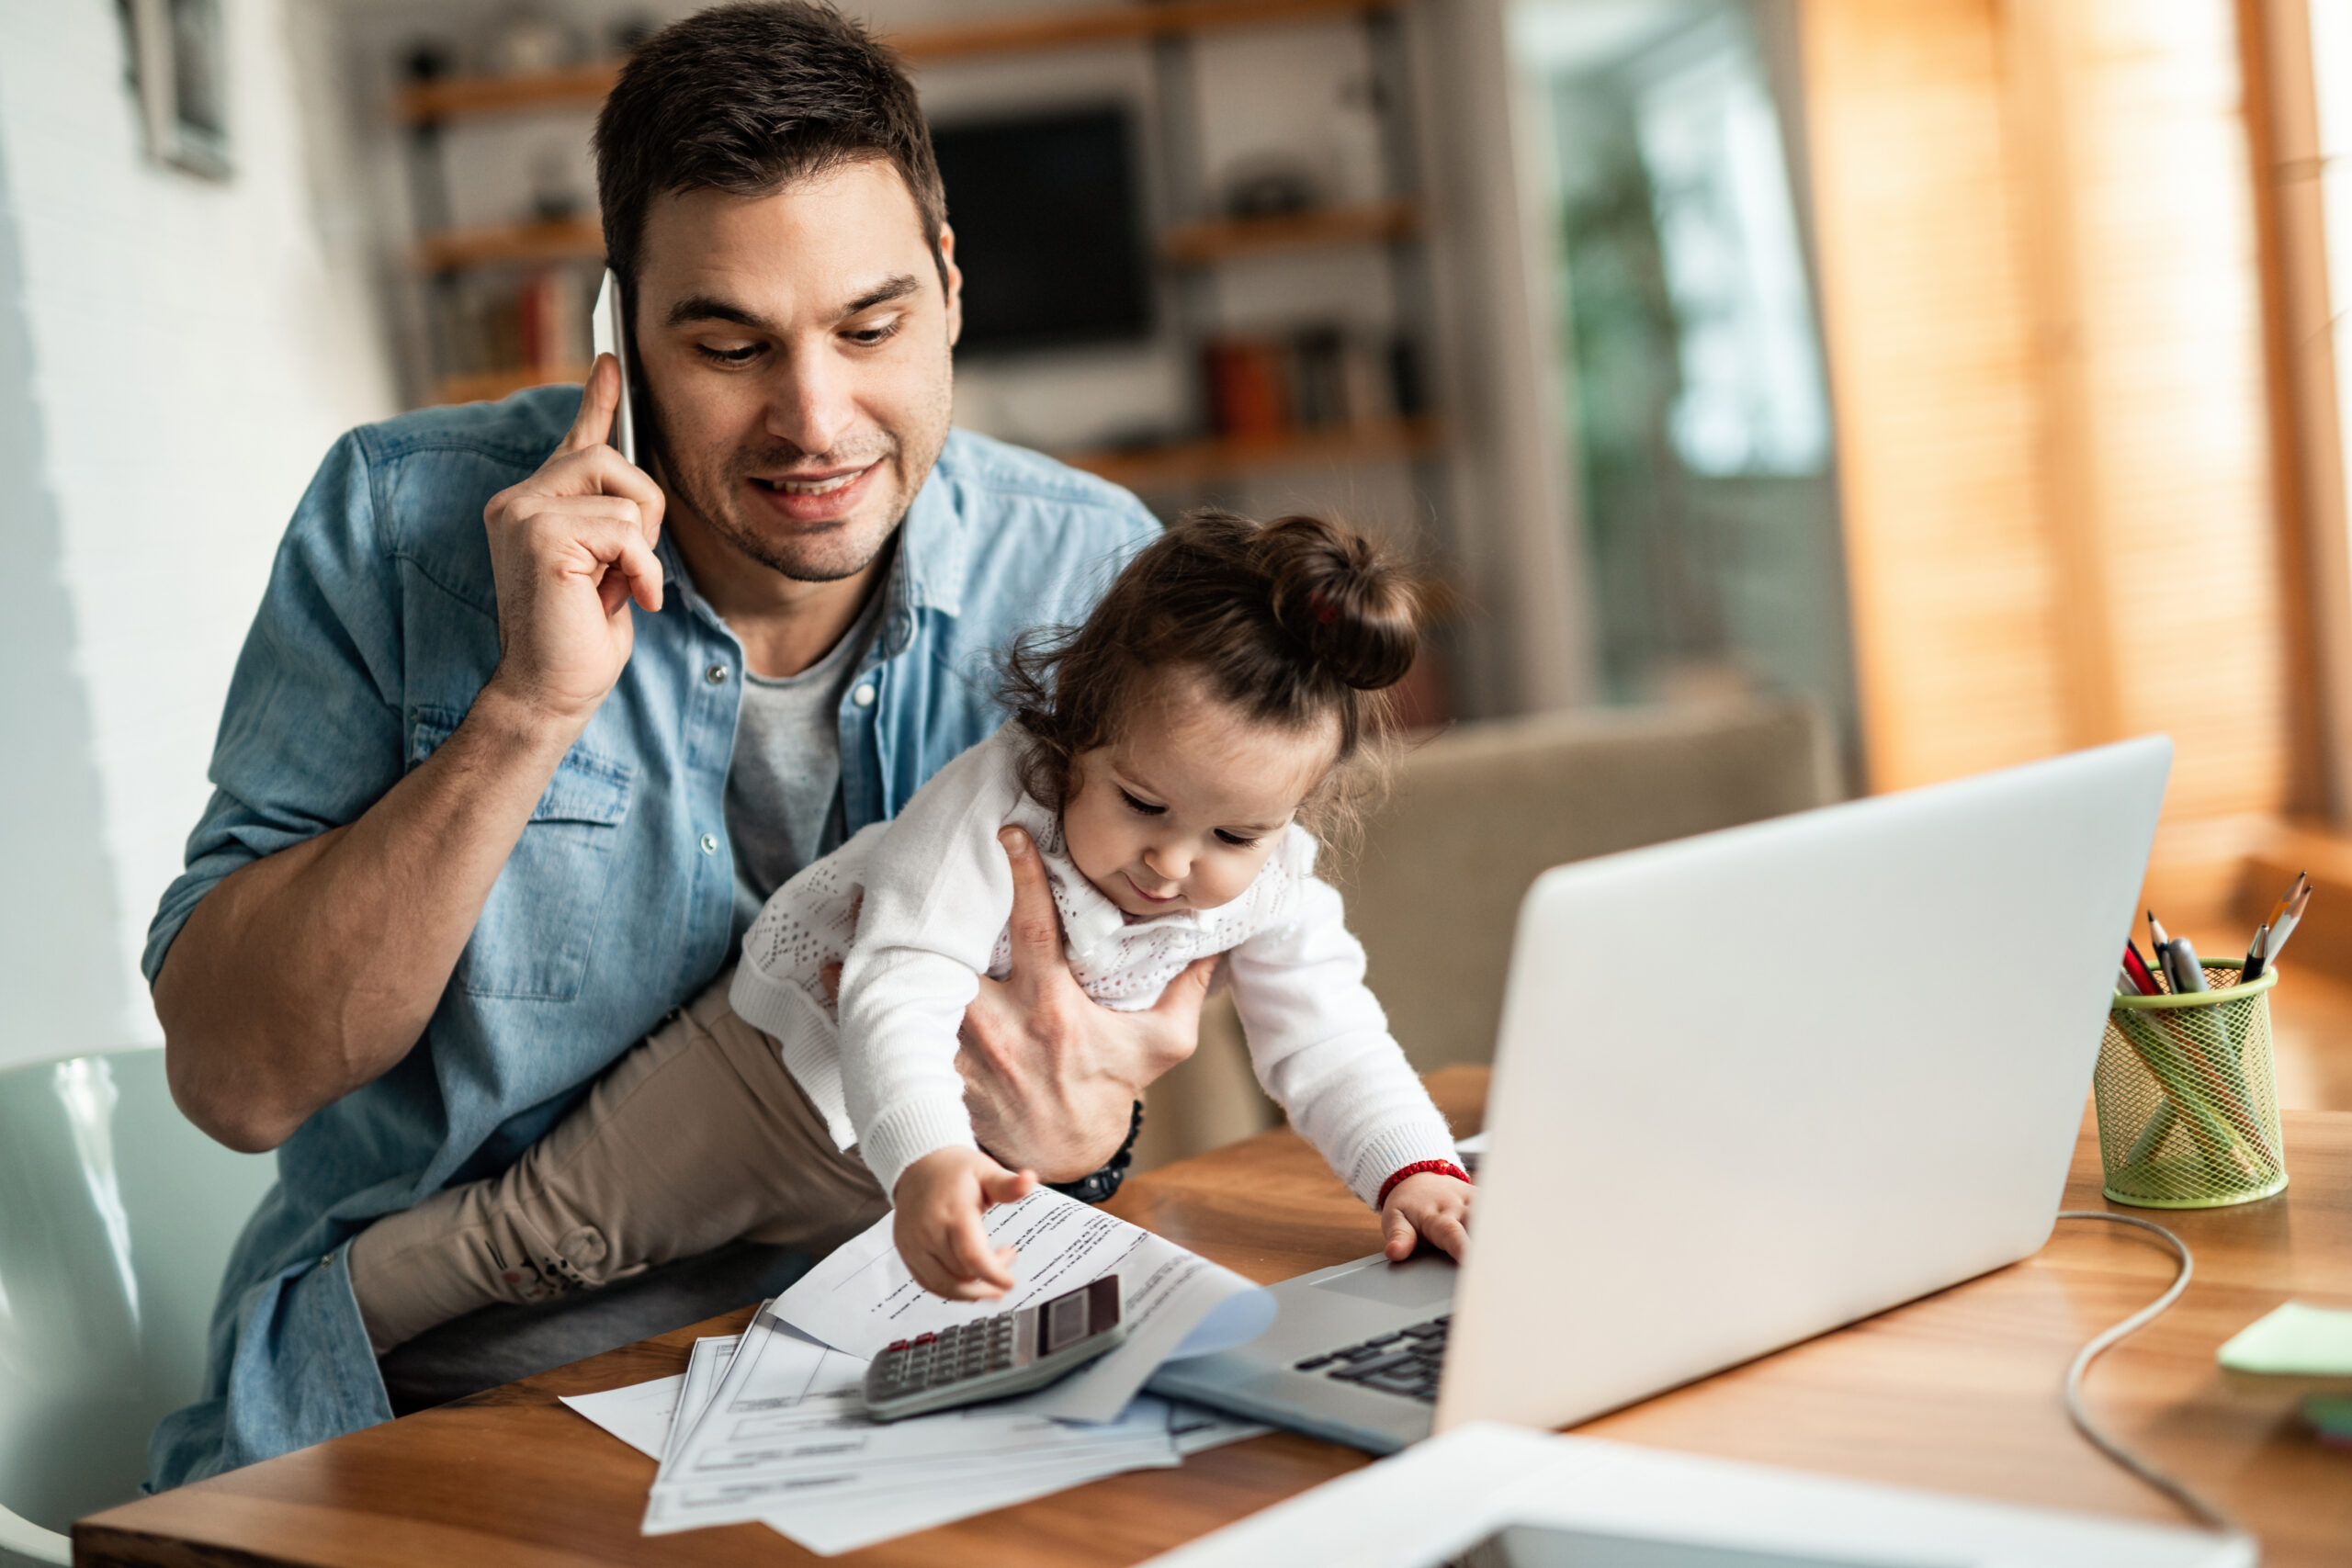 Image of a parent holding child, whilst on the phone and using a laptop